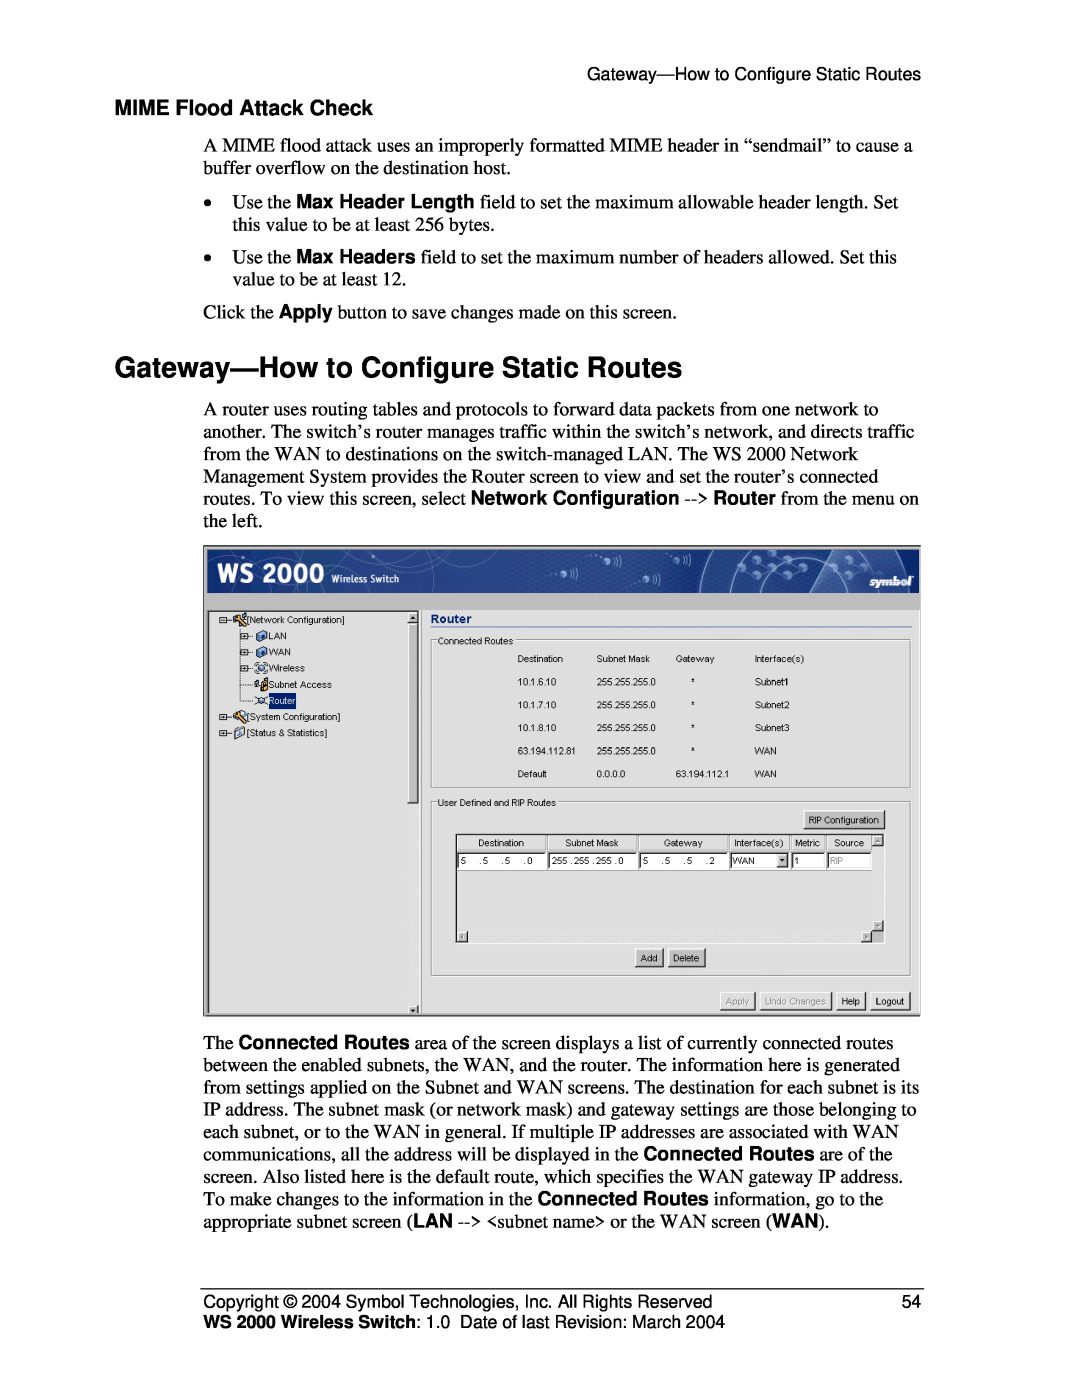 Symbol Technologies WS 2000 manual Gateway-How to Configure Static Routes, MIME Flood Attack Check 